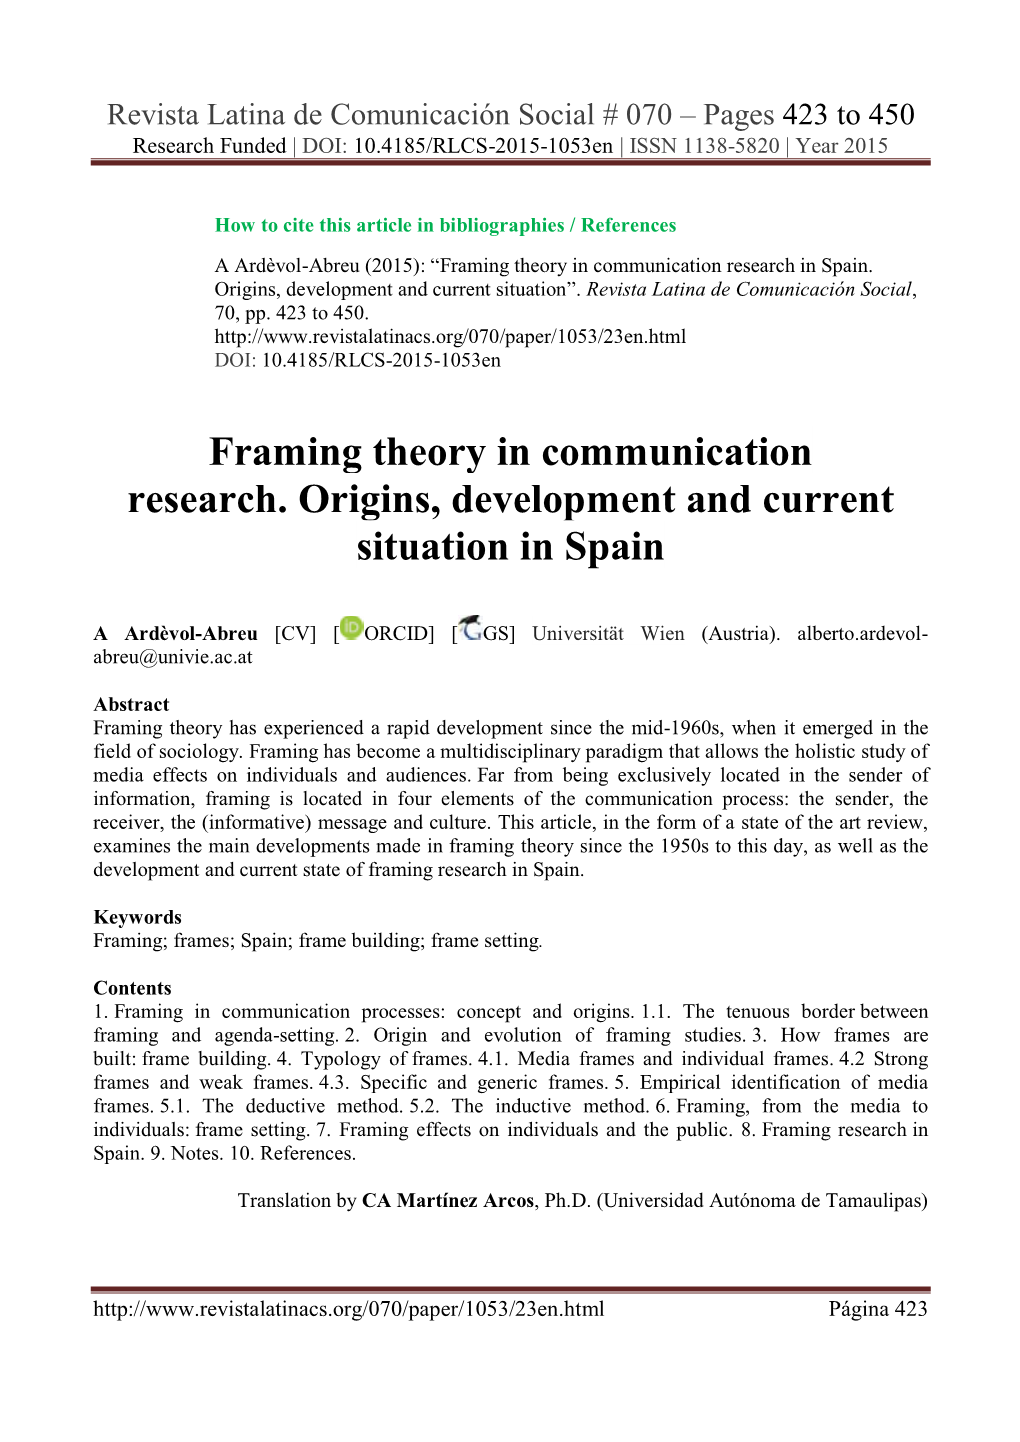 Framing Theory in Communication Research. Origins, Development and Current Situation in Spain